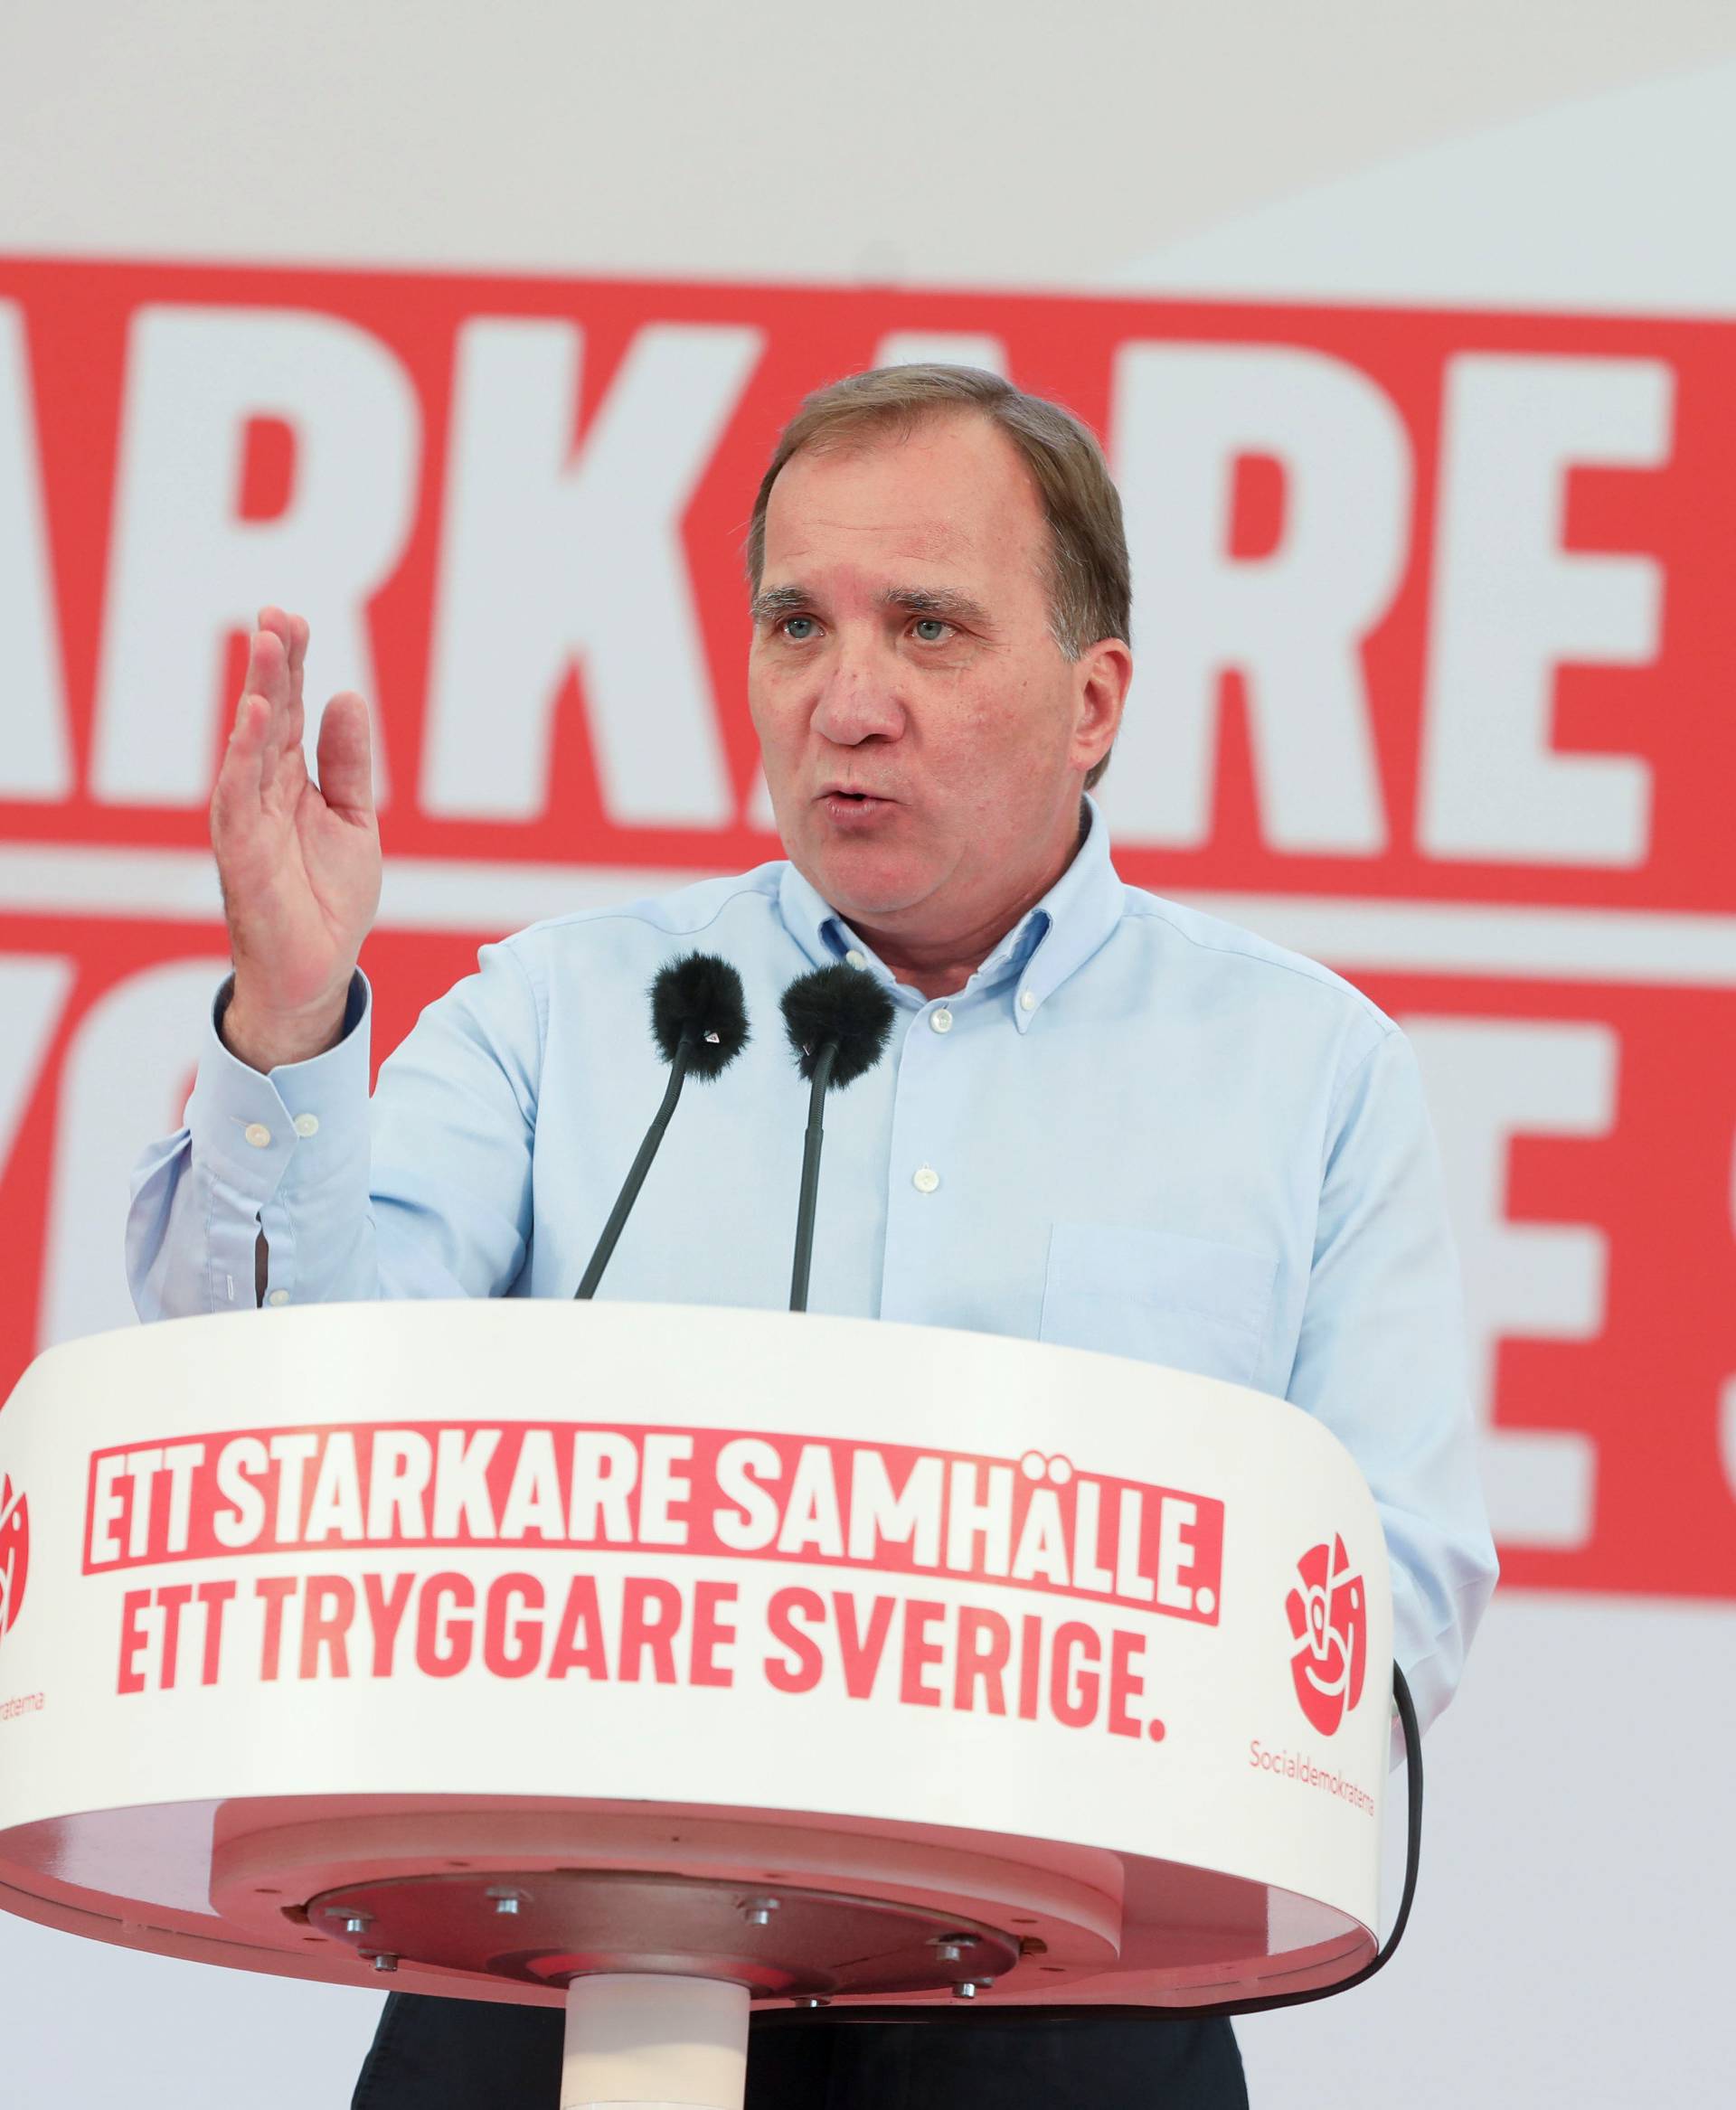 Sweden's PM and leader of Social Democrats Lofven speaks during election campaign meeting in Botkyrka, near Stockholm